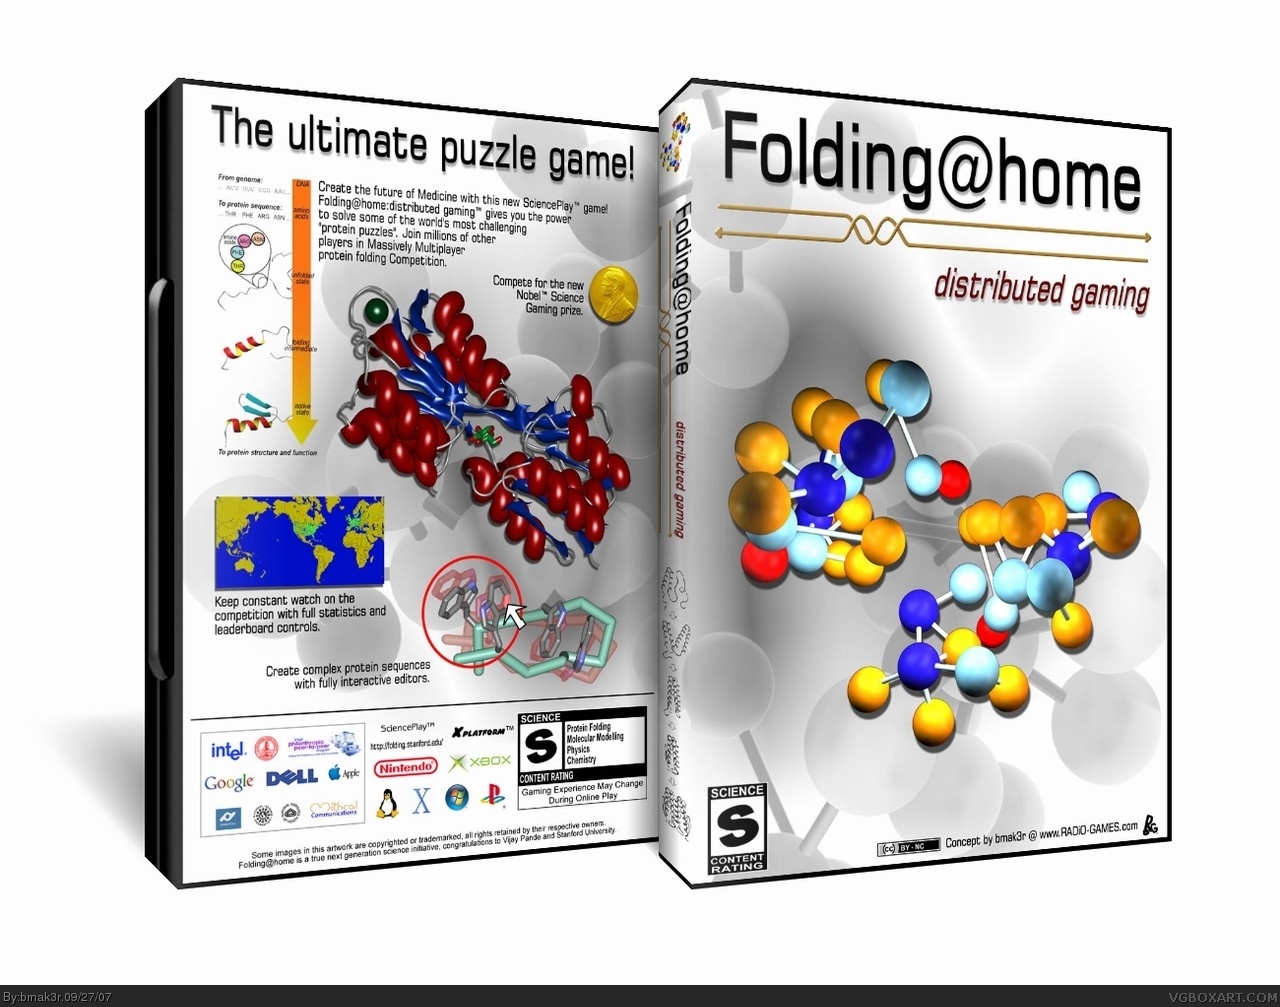 Folding@home distributed gaming box cover